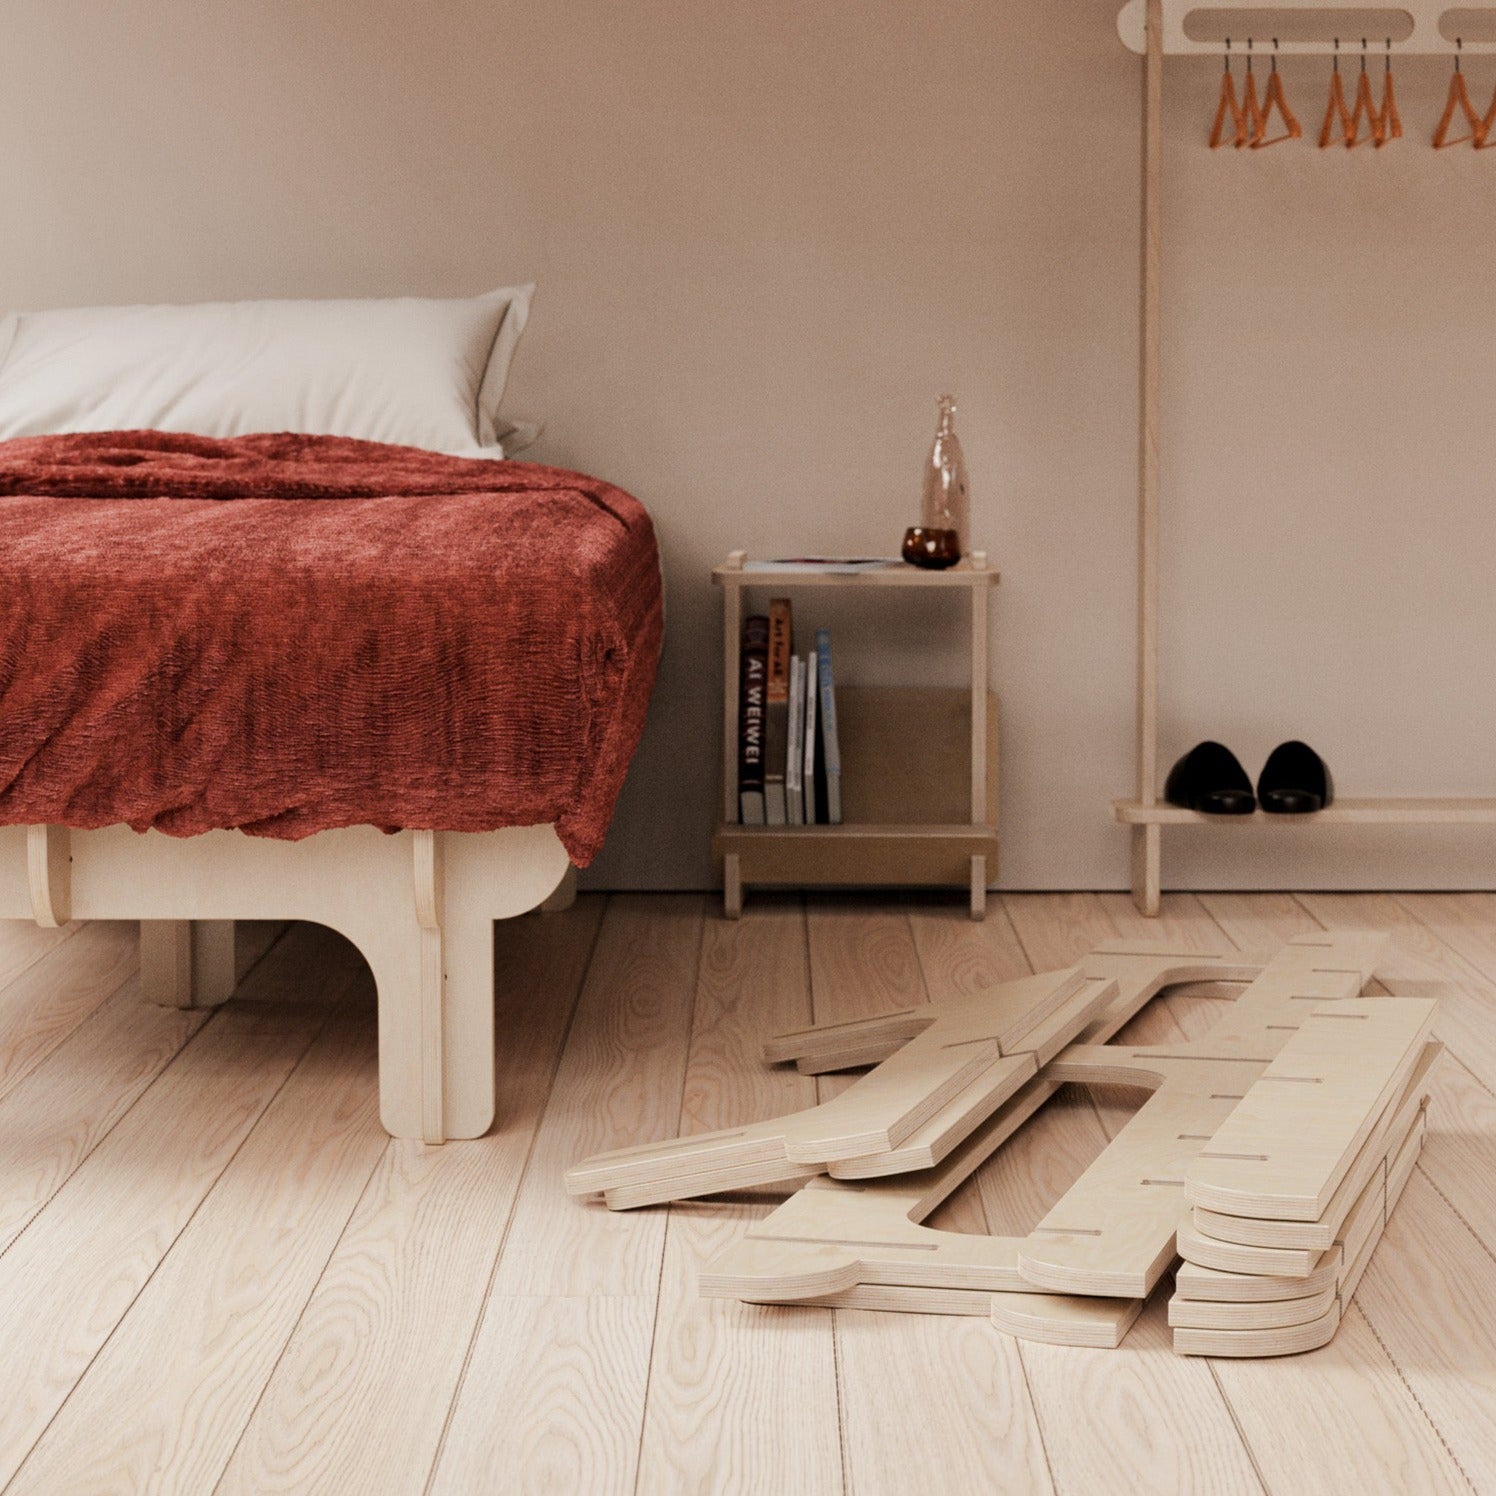 wood bed platform, easy to assemble, modular, birch wood, modern style, disassembled flat pack